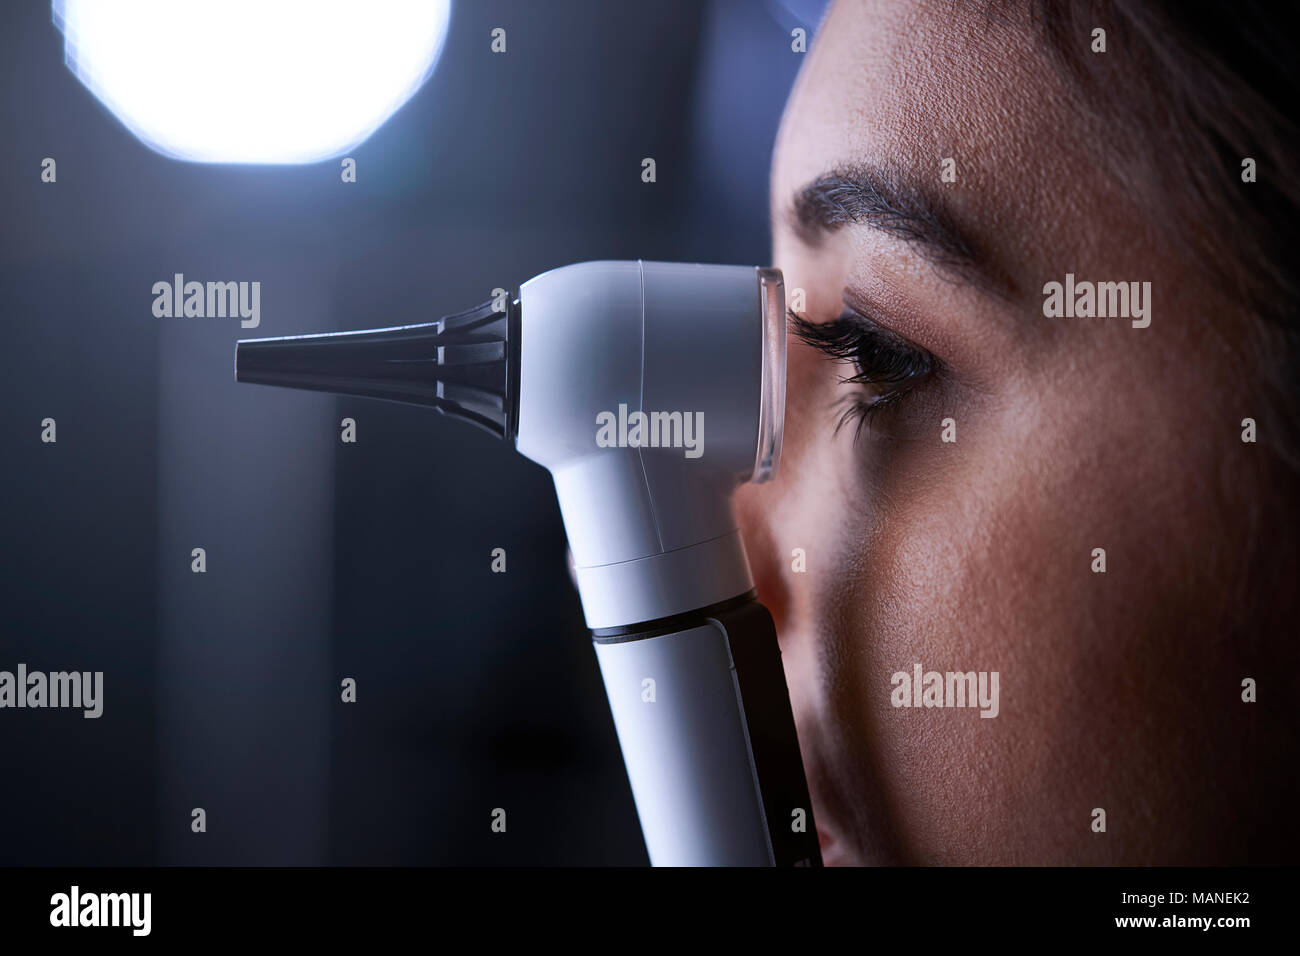 Female doctor using otoscope for examination, side view Stock Photo